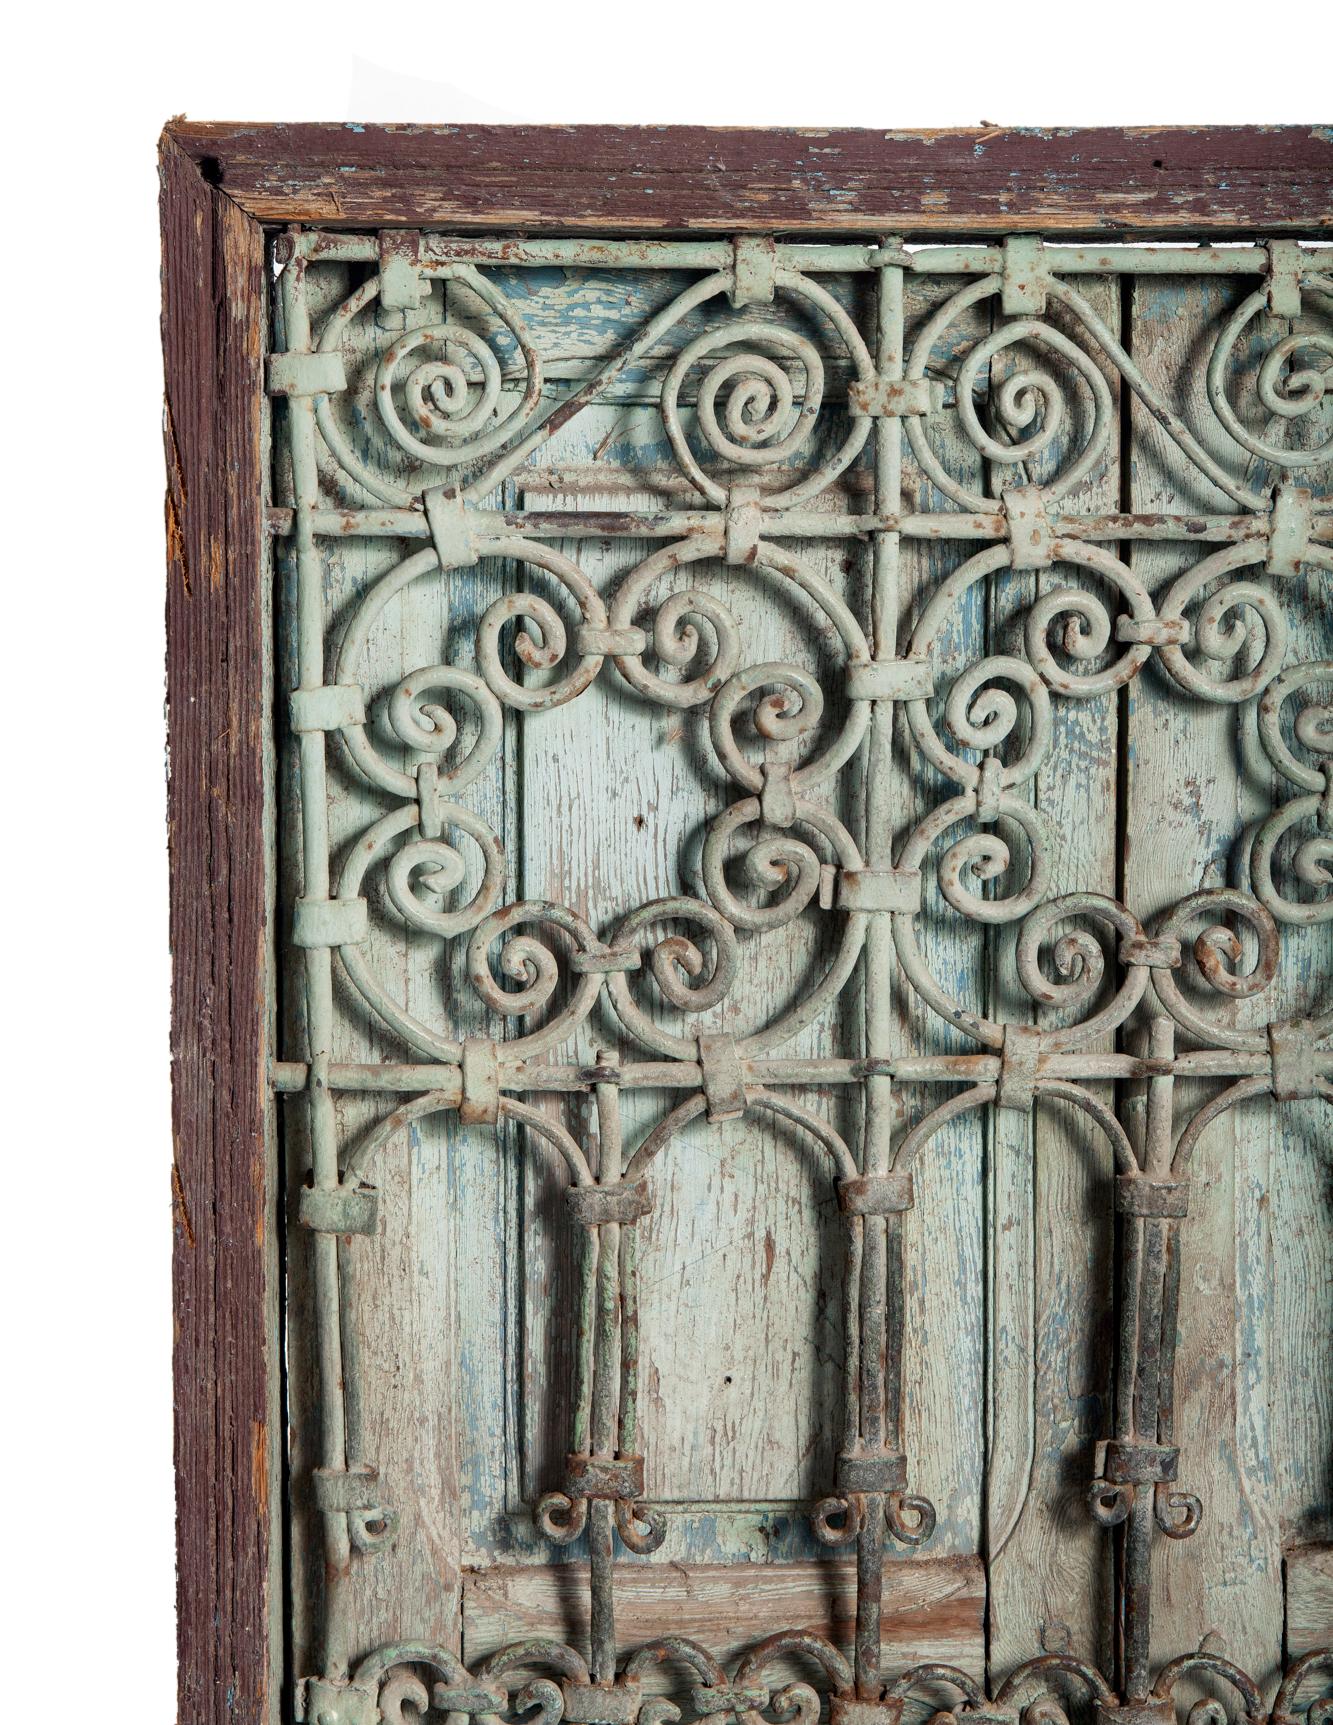 Antique & weathered, an early 19thC Moroccan window with the original shutters. Pale green weathered patina on the hand forged iron made in the early 1800's.
still maintains old paint in the original green.
French antique wrought iron window guard